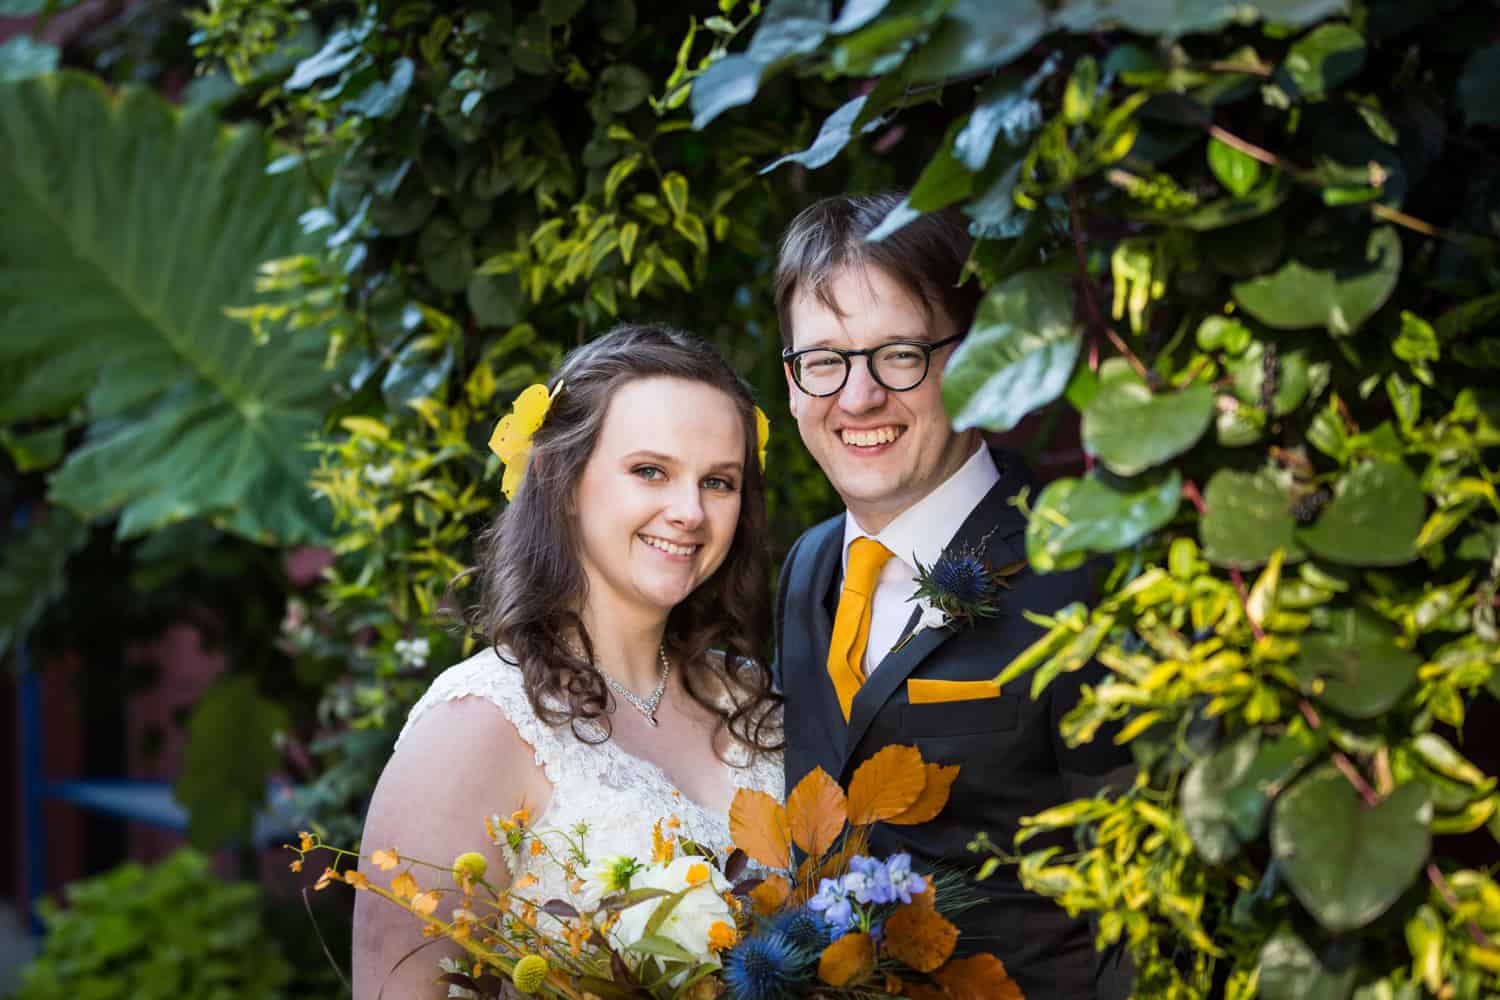 Bride and groom surrounded by plants for an article on Covid-19 wedding planning